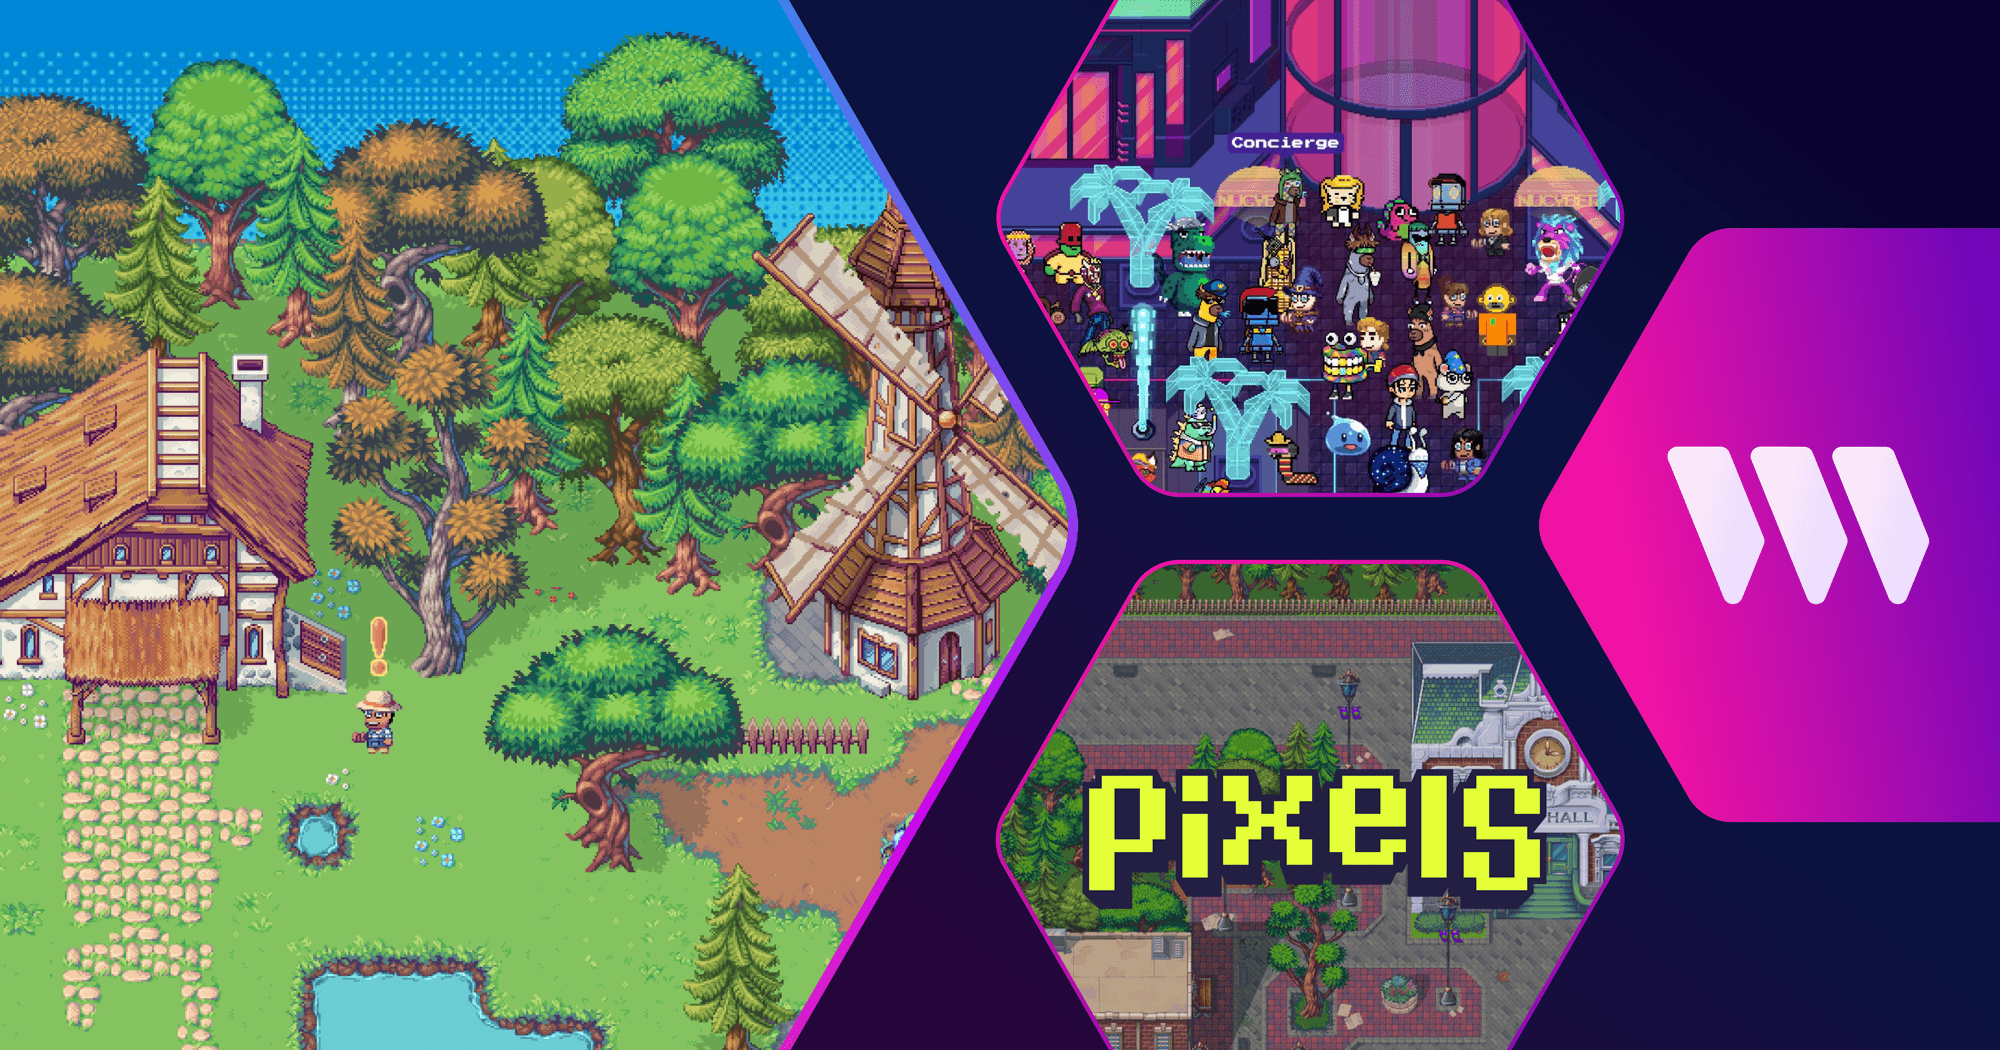 Pixels Builds an On-Chain Ecosystem for its Open-World Web3 Game